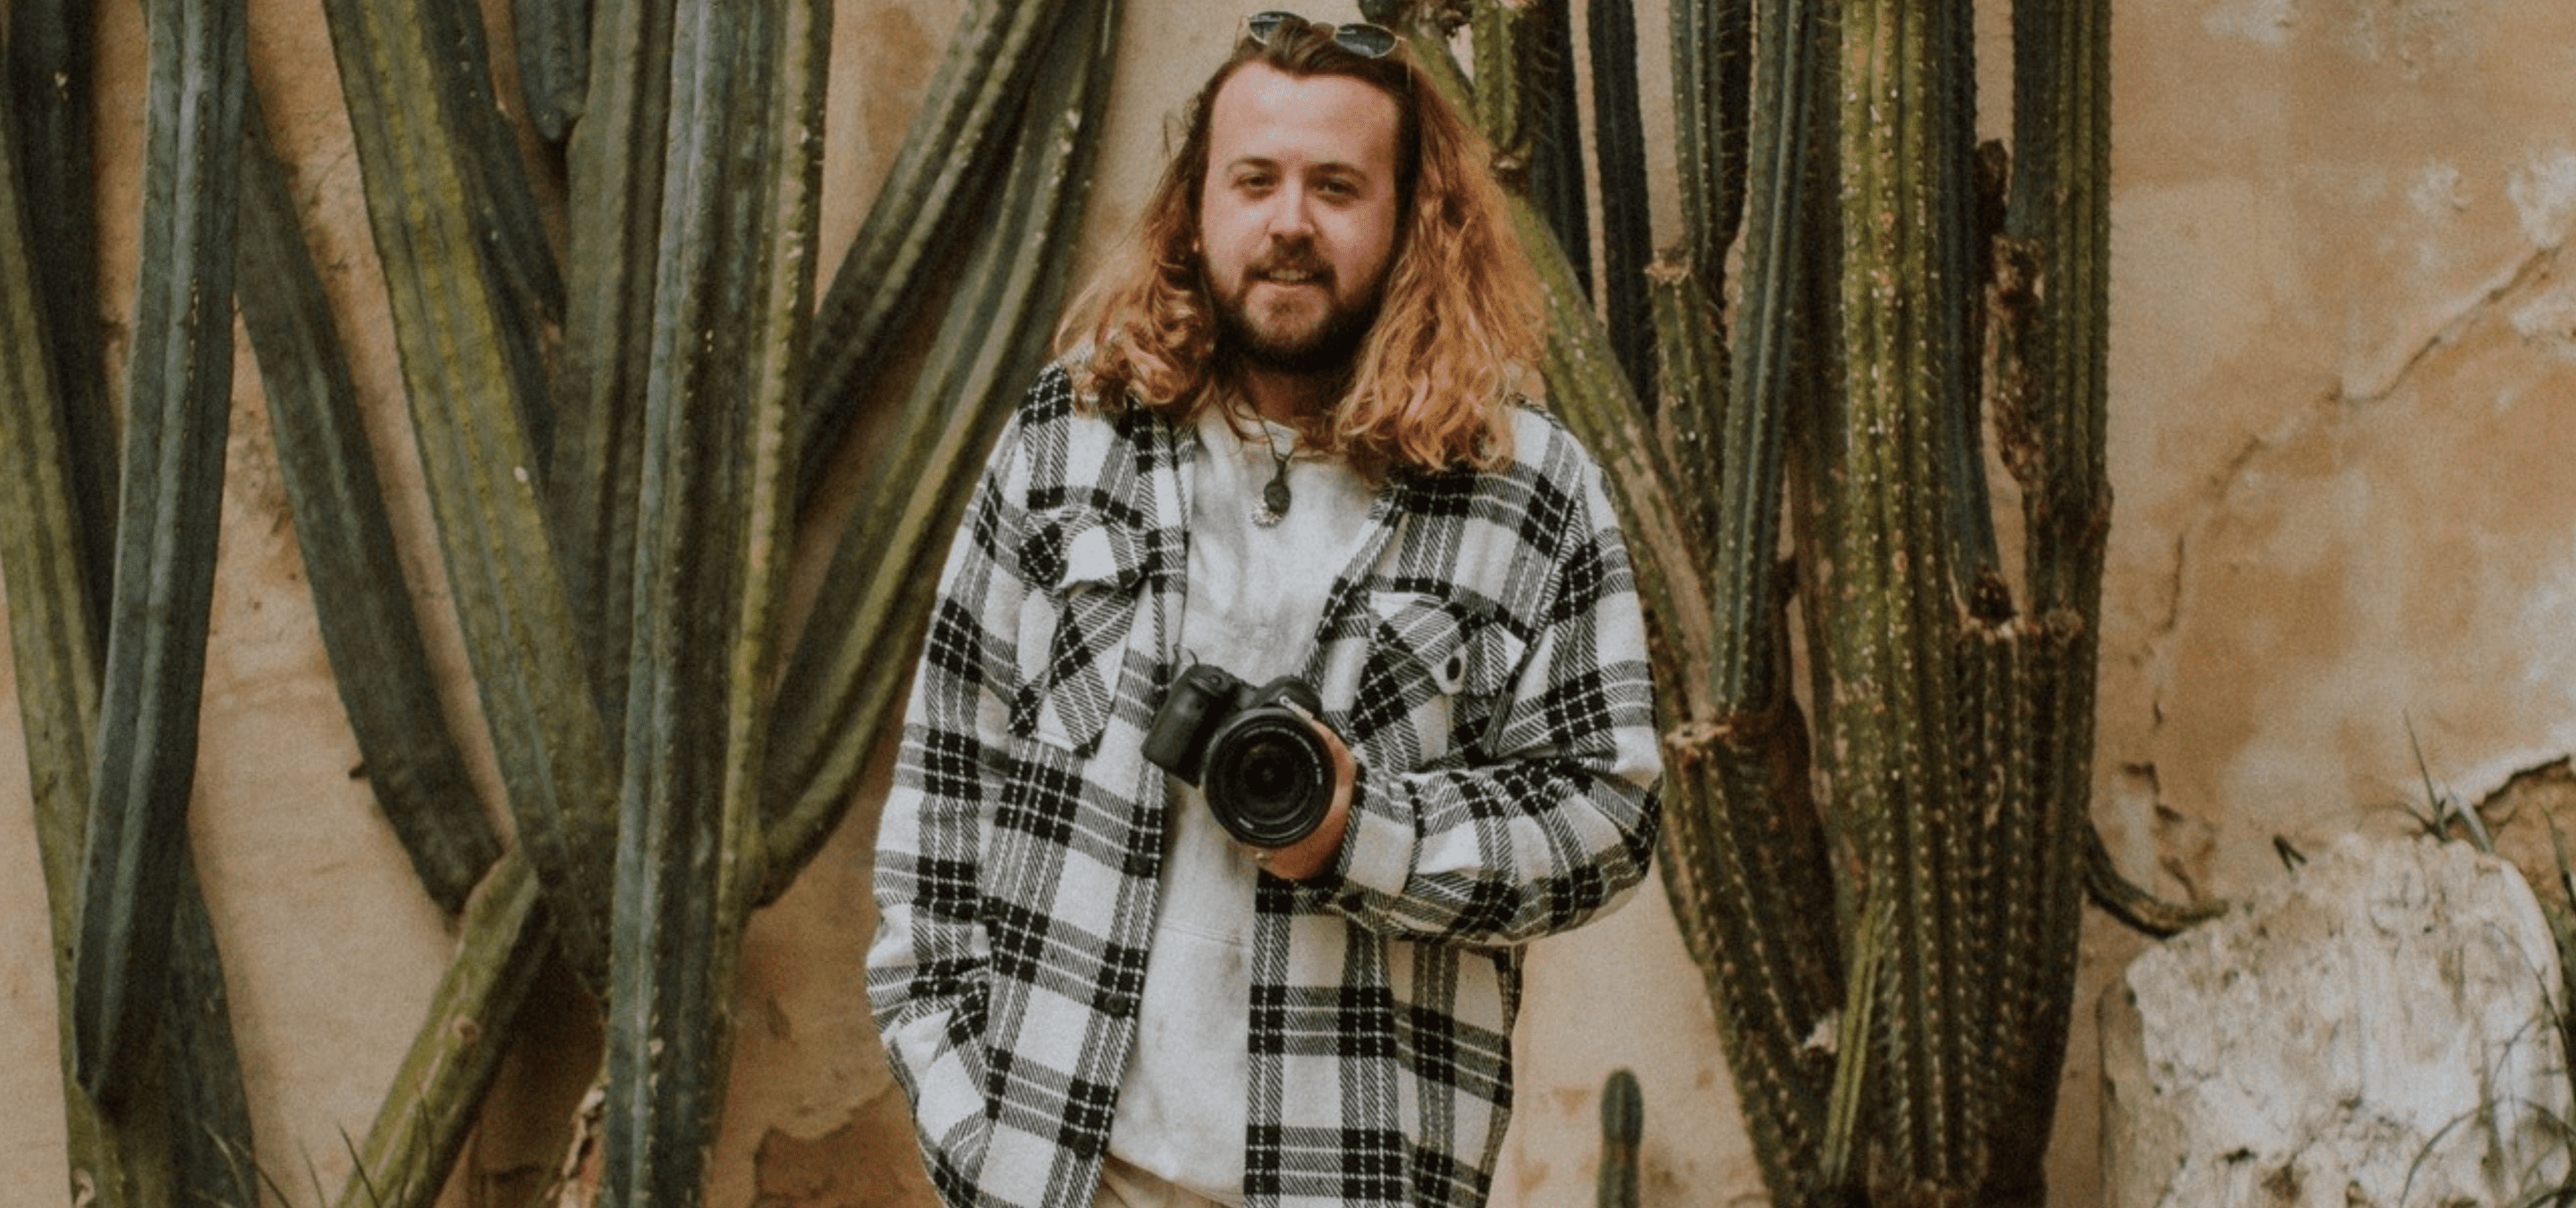 Male photographer outside stood in front of plants